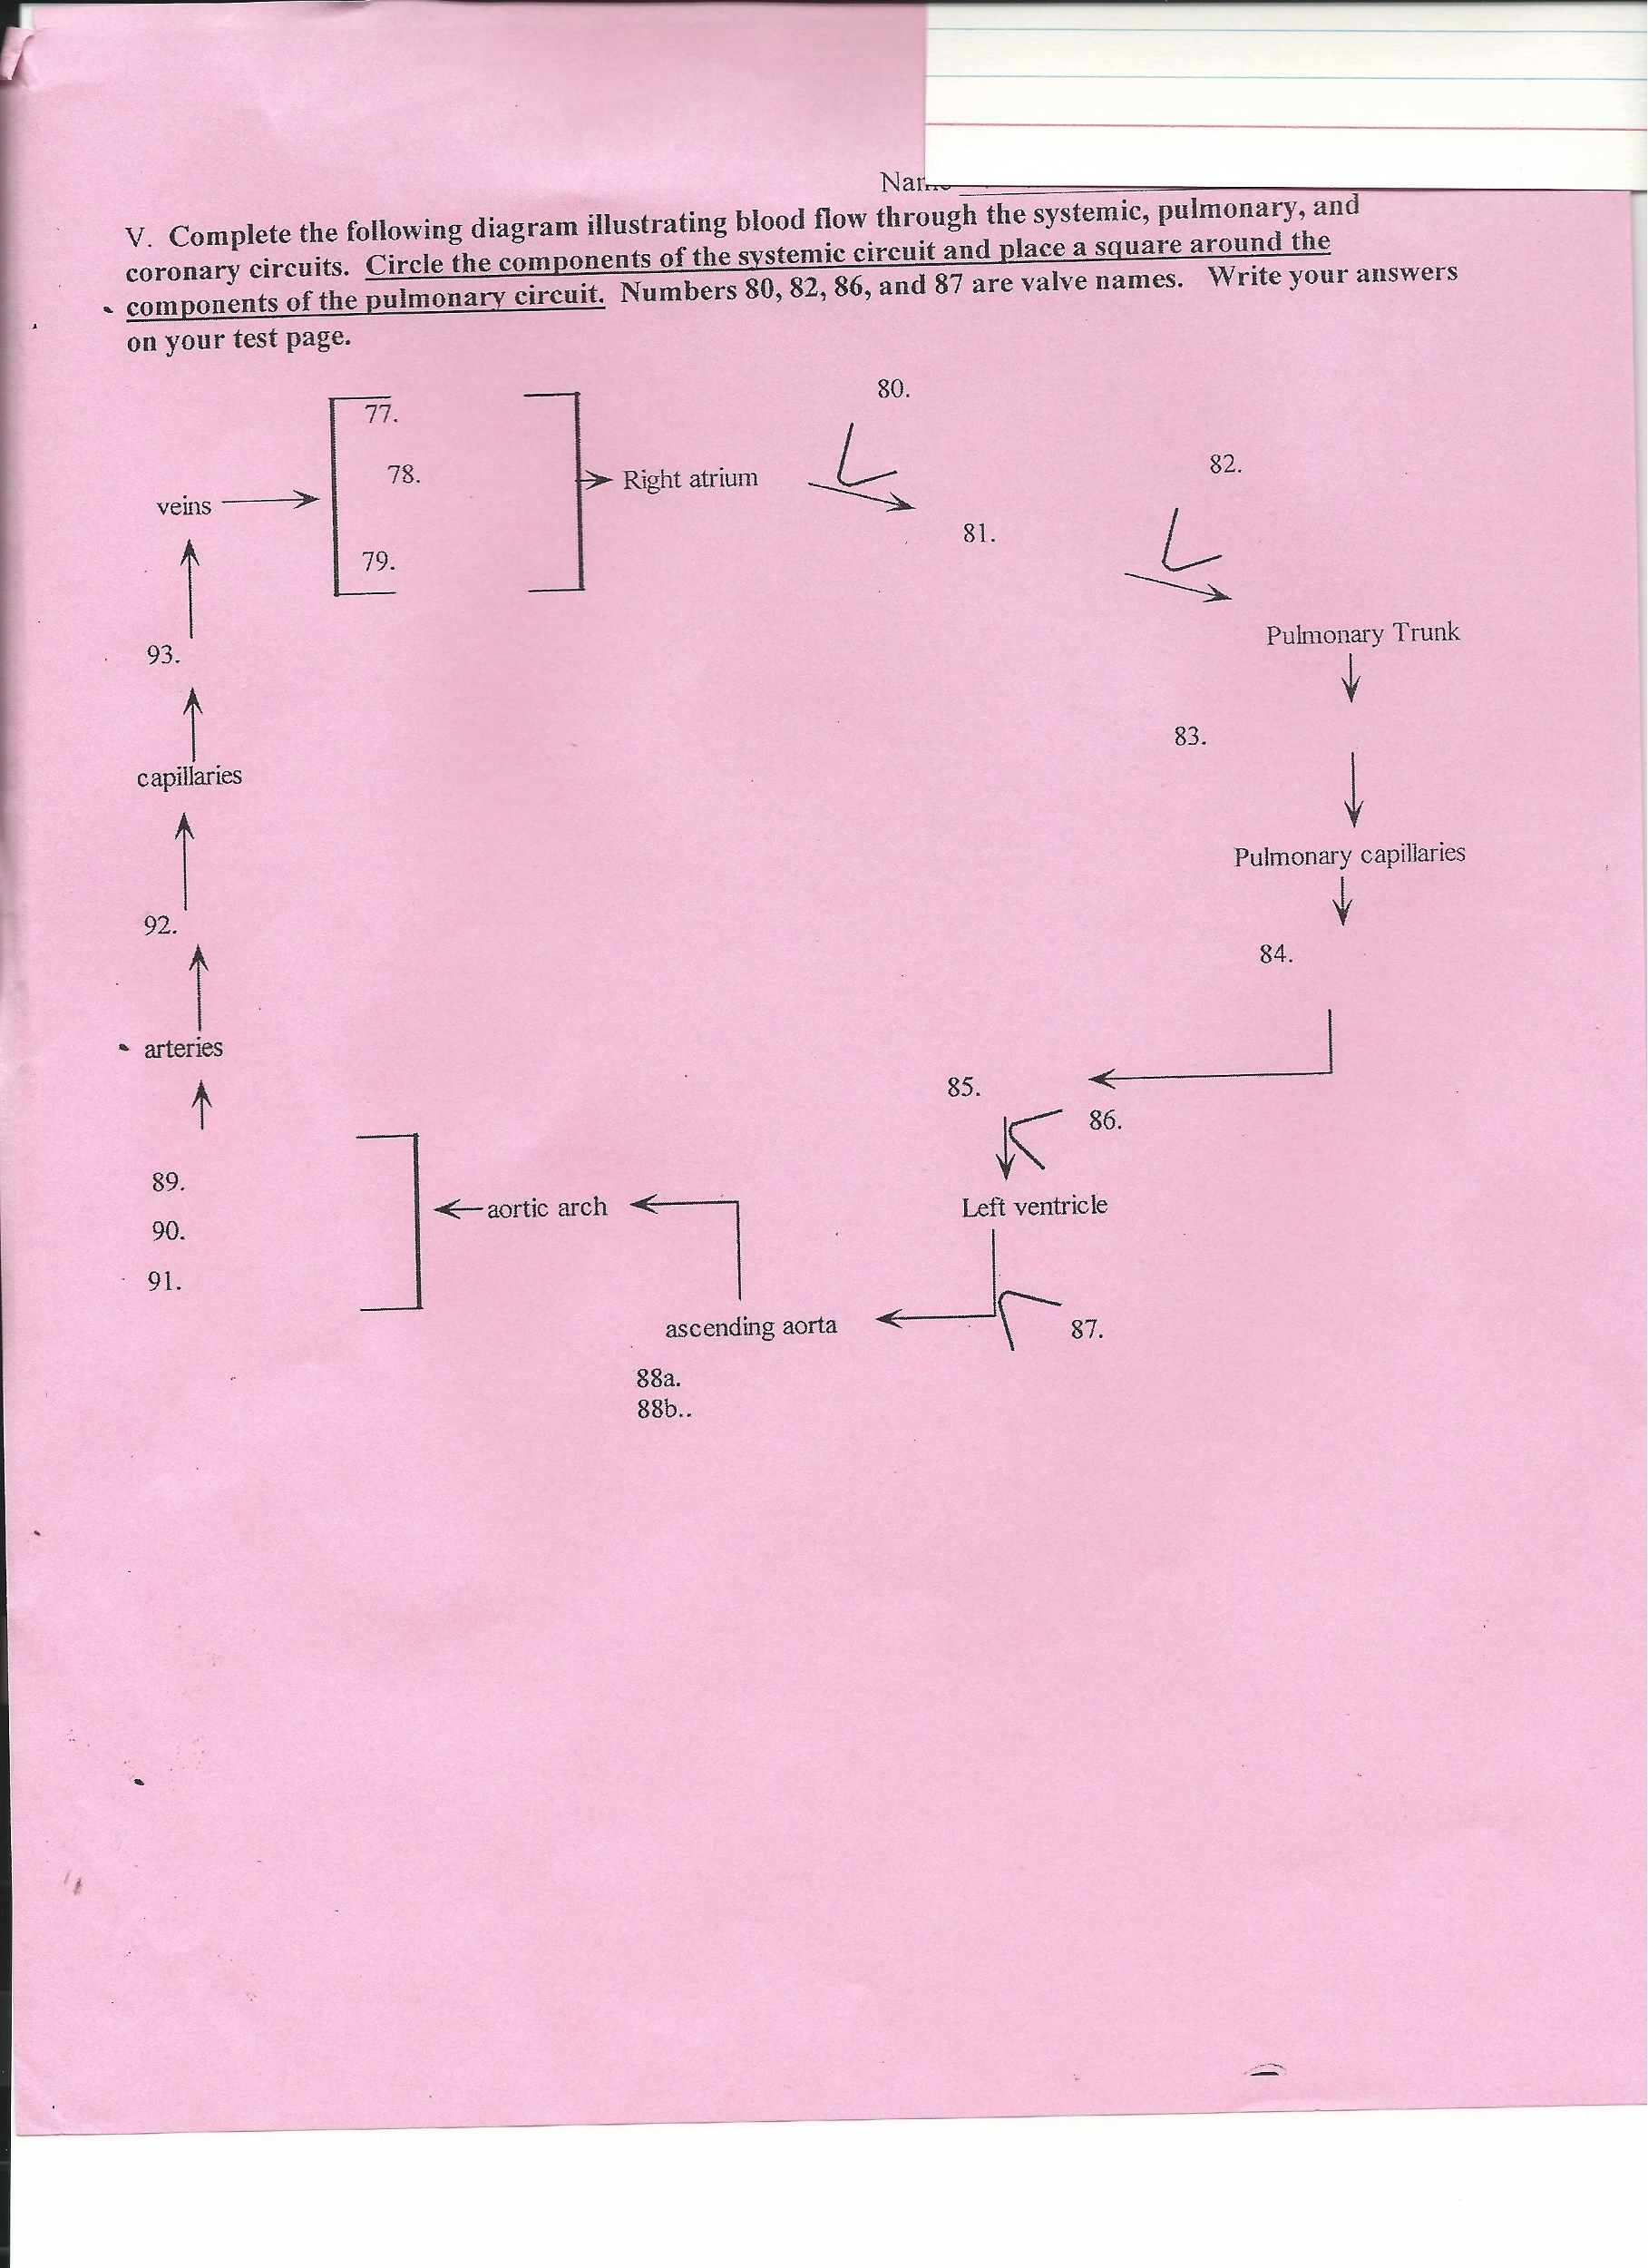 Flow Chart Of Systemic And Pulmonary Circulation